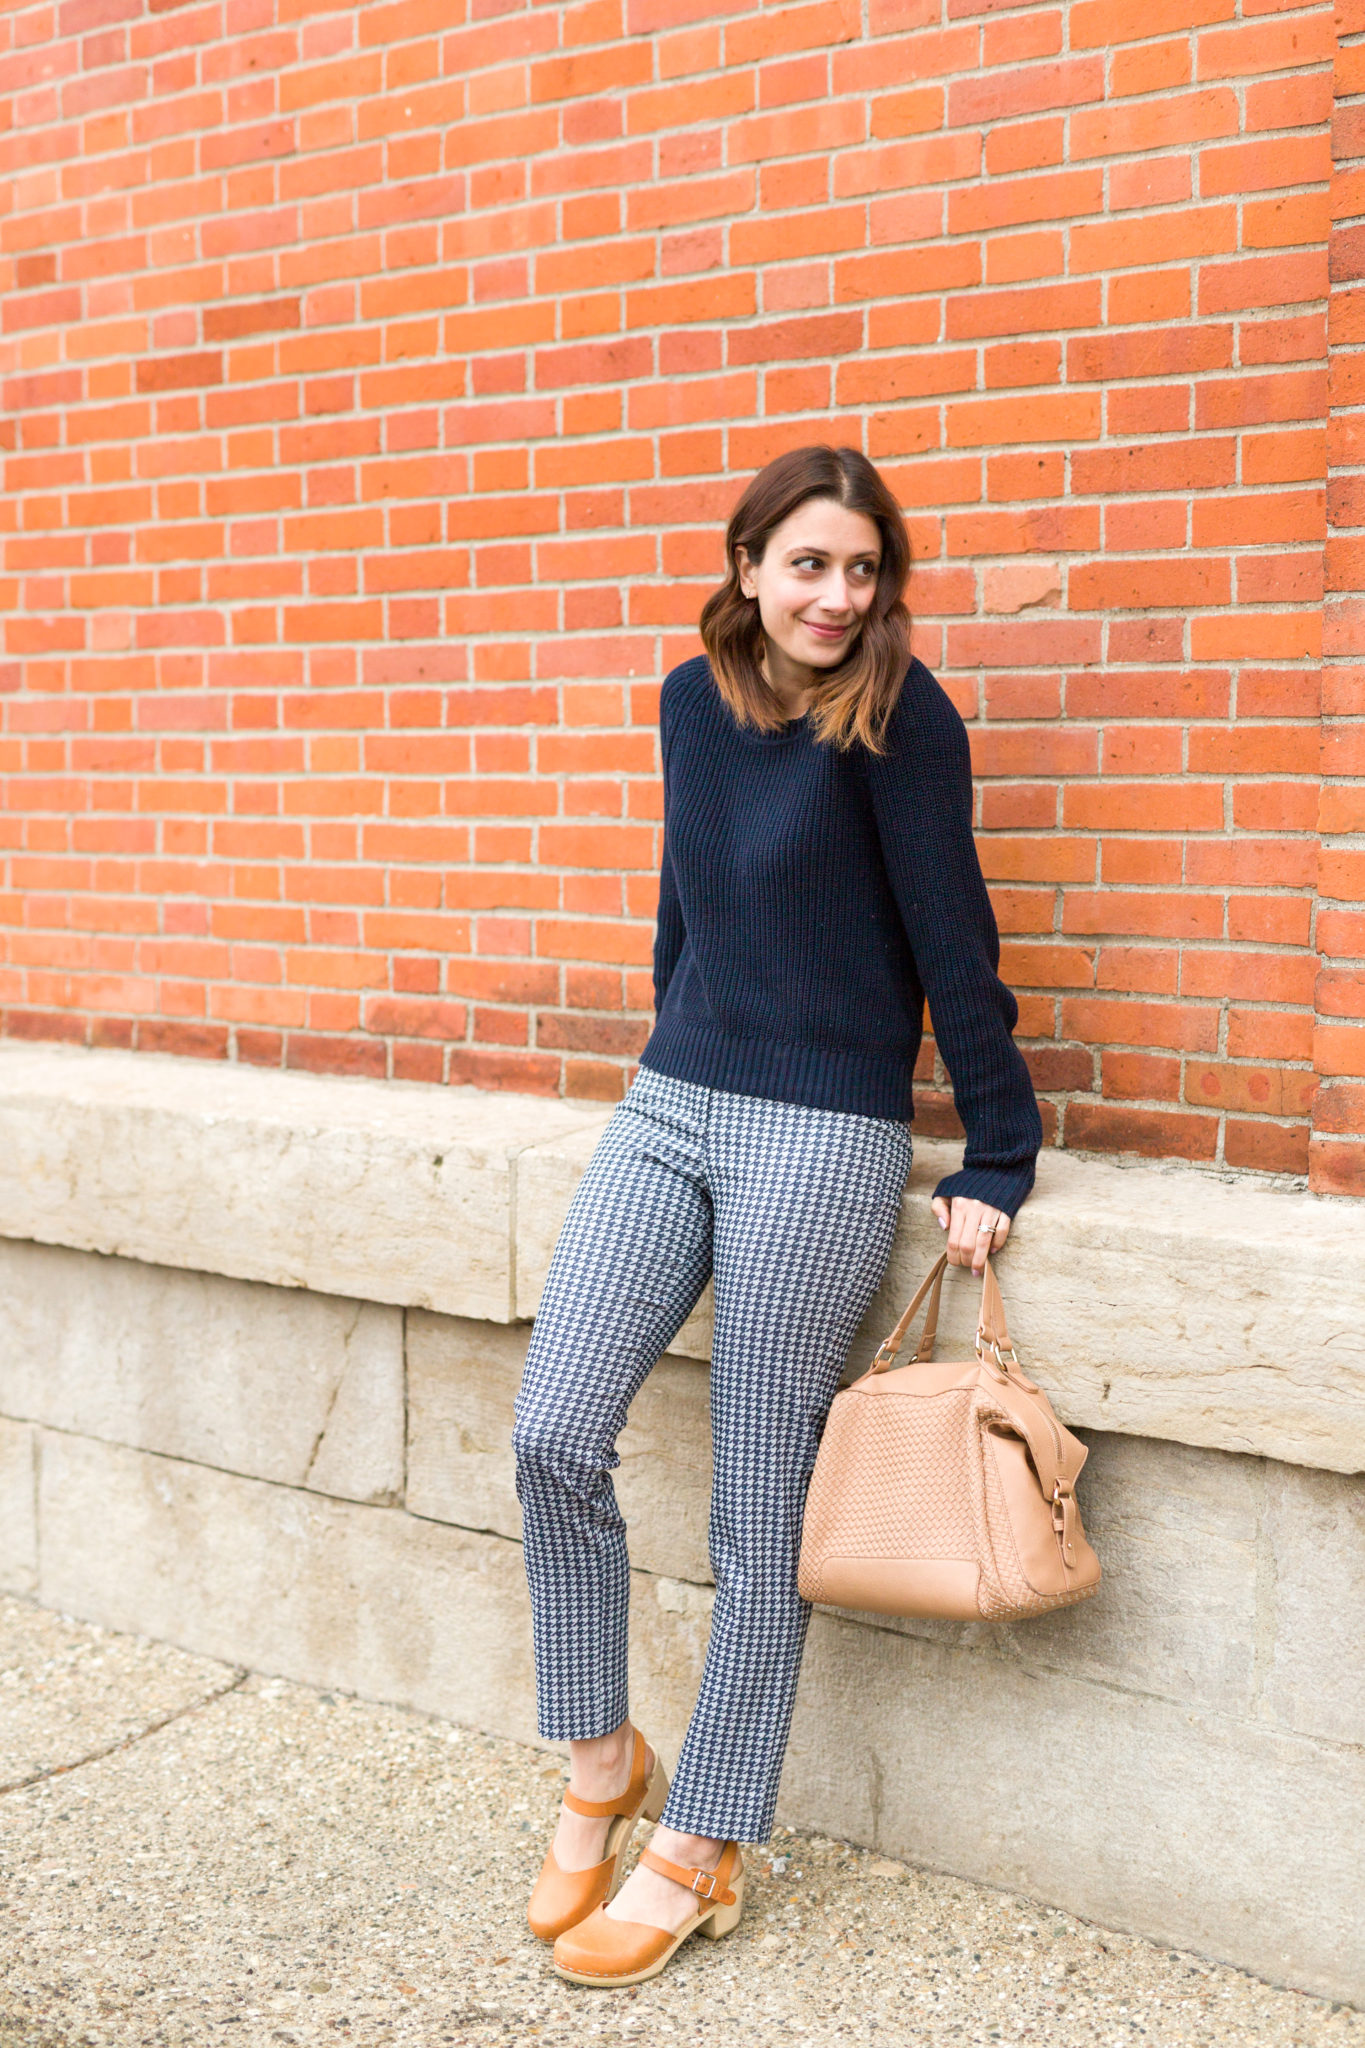 Margaret M Slimming pants | styling clogs for work | how to wear clogs to the office | the perfect pants for the office | work wear style on allweareblog.com